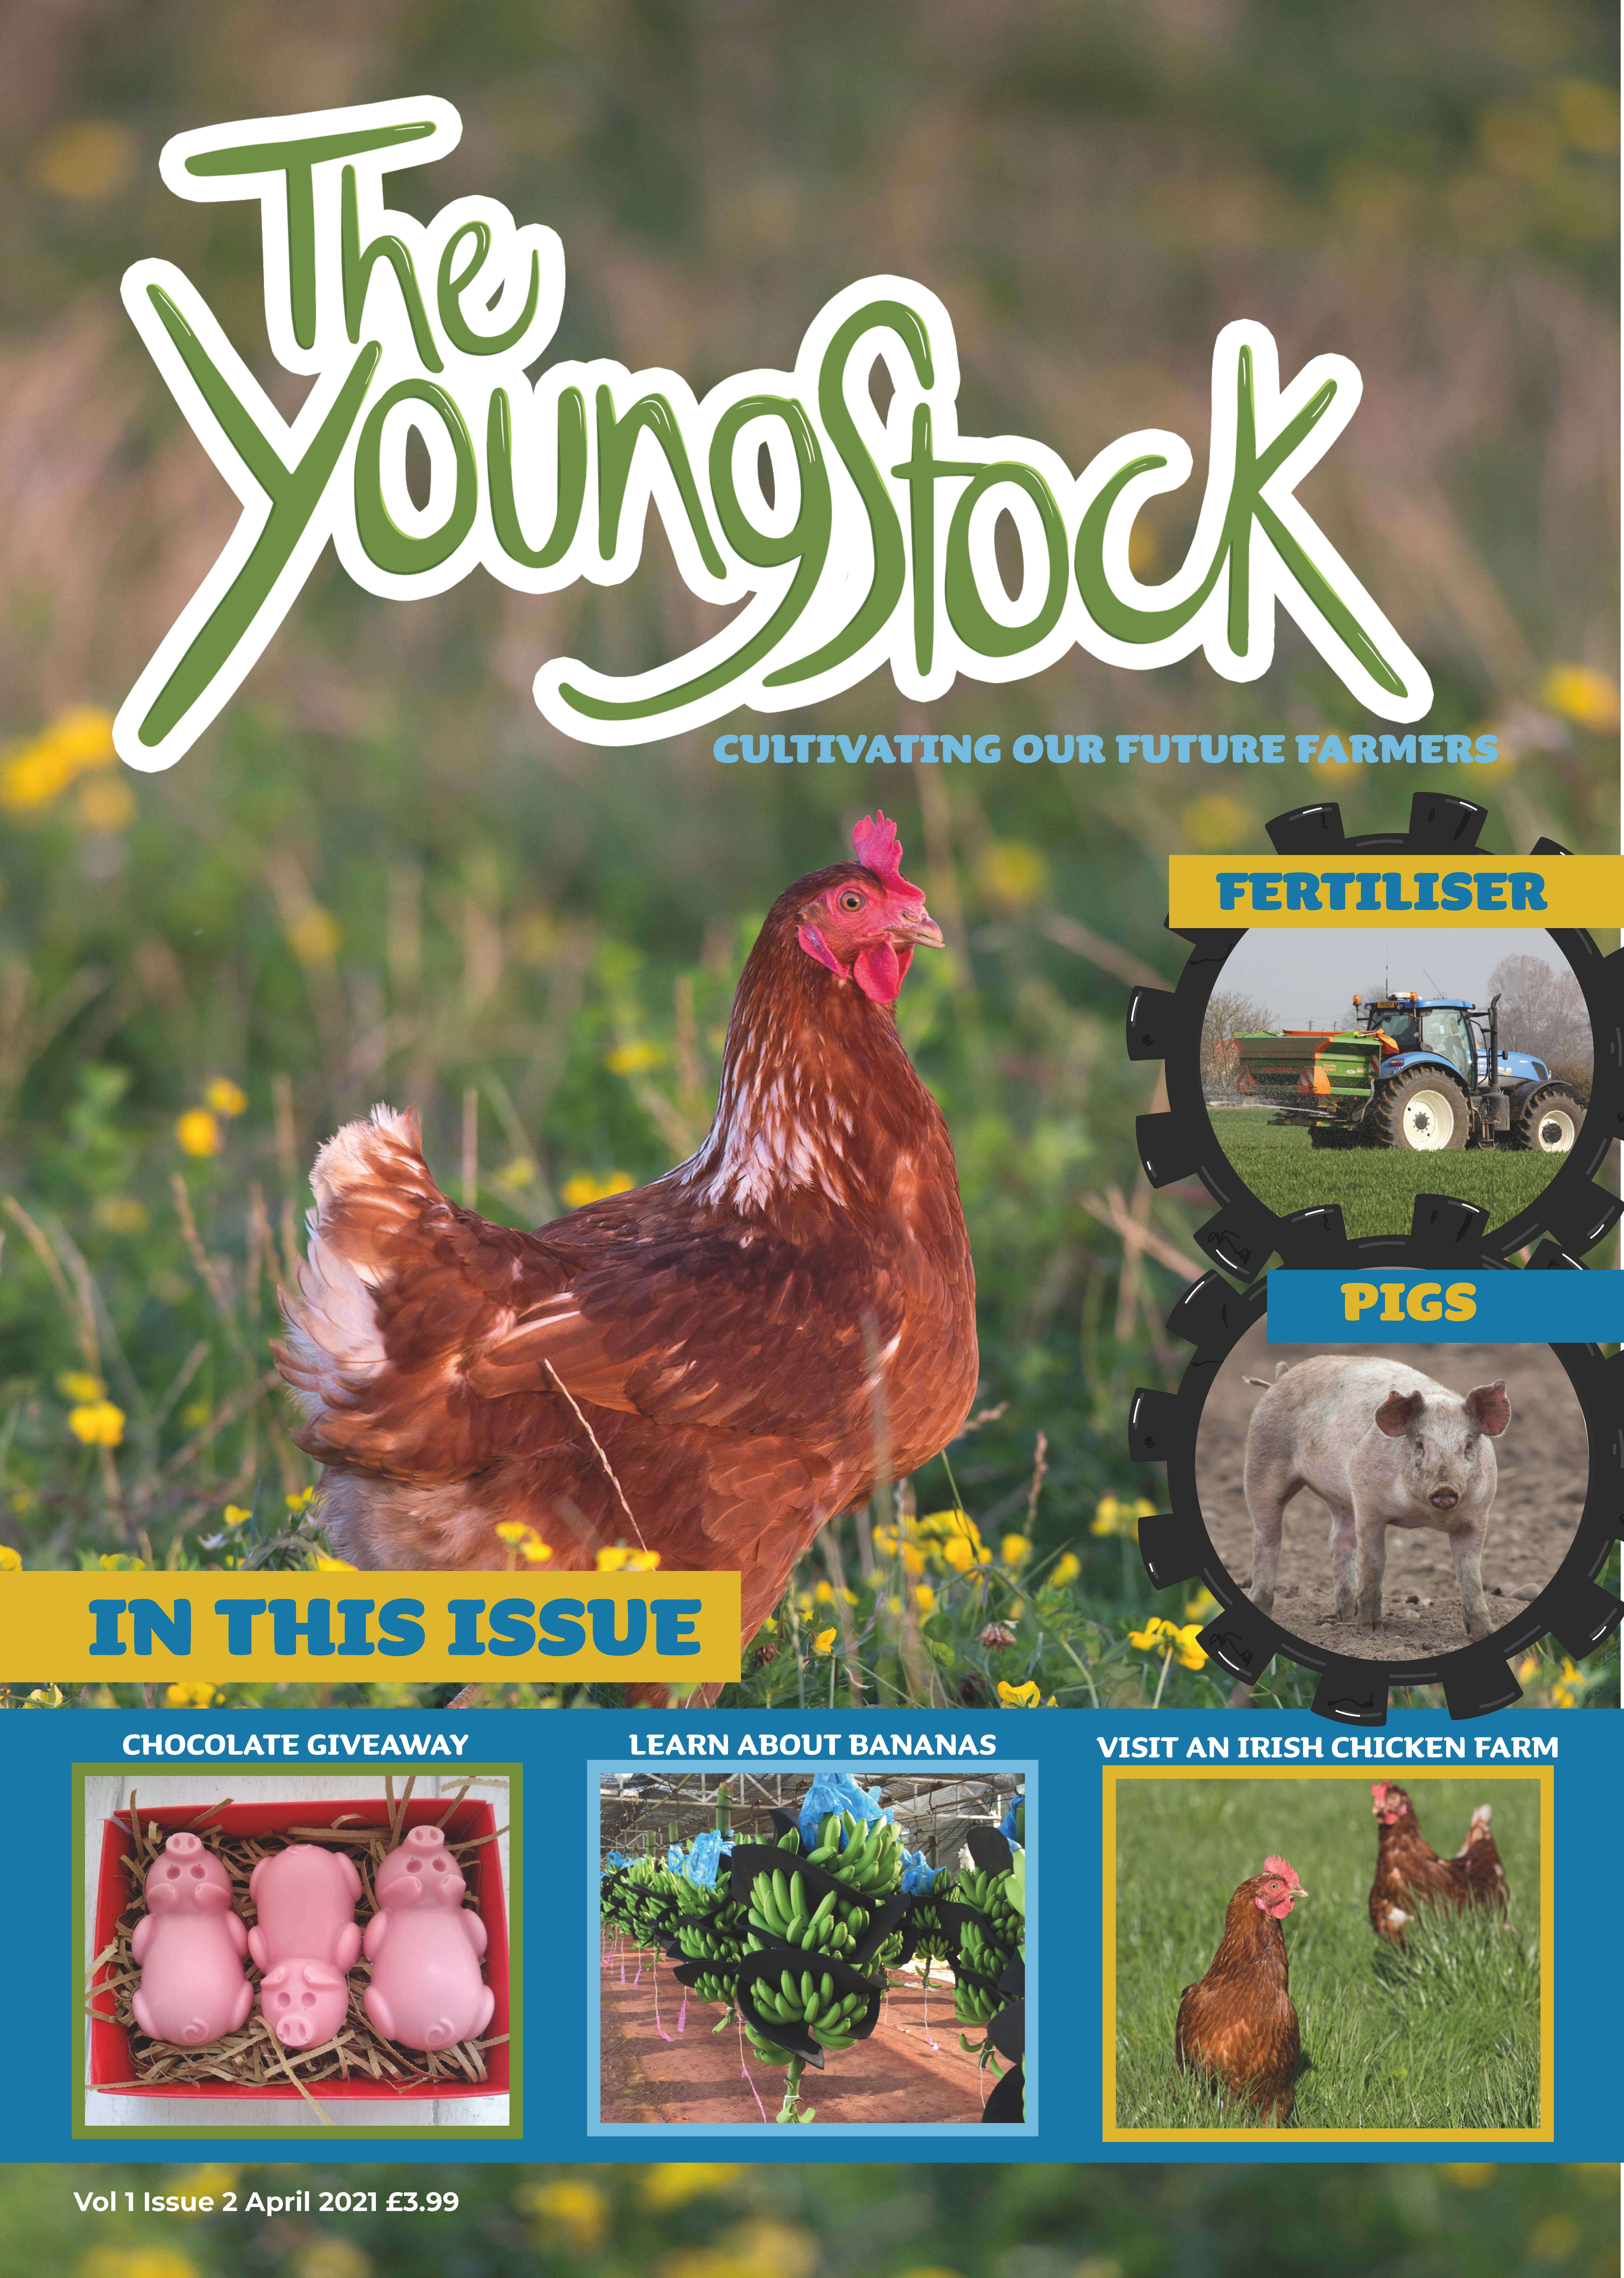 New farming magazine launched for kids